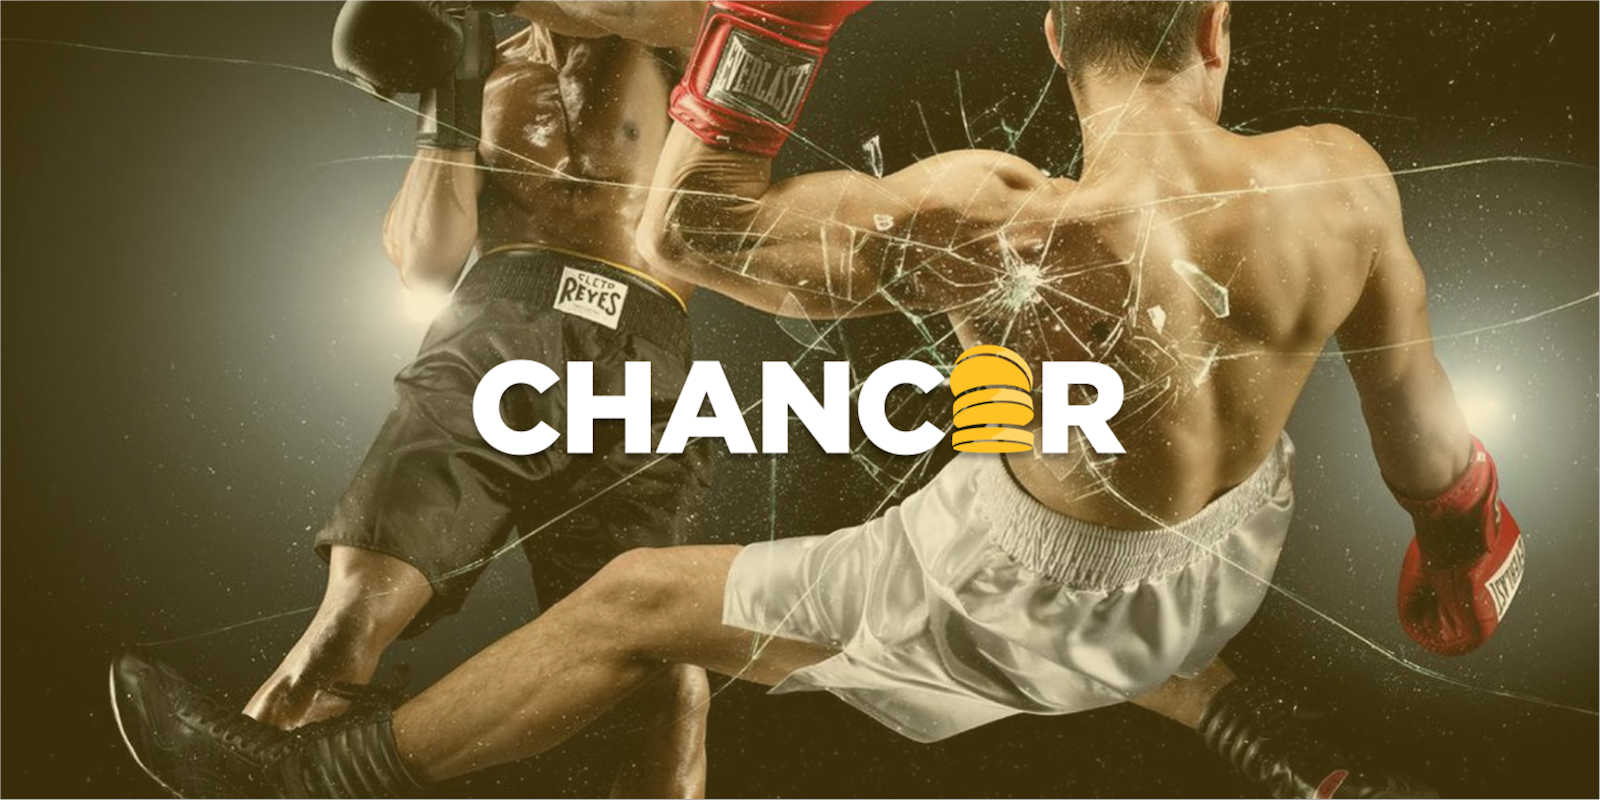 $1.7m Raised Shows Why Chancer is Ranking in Crypto Reddit